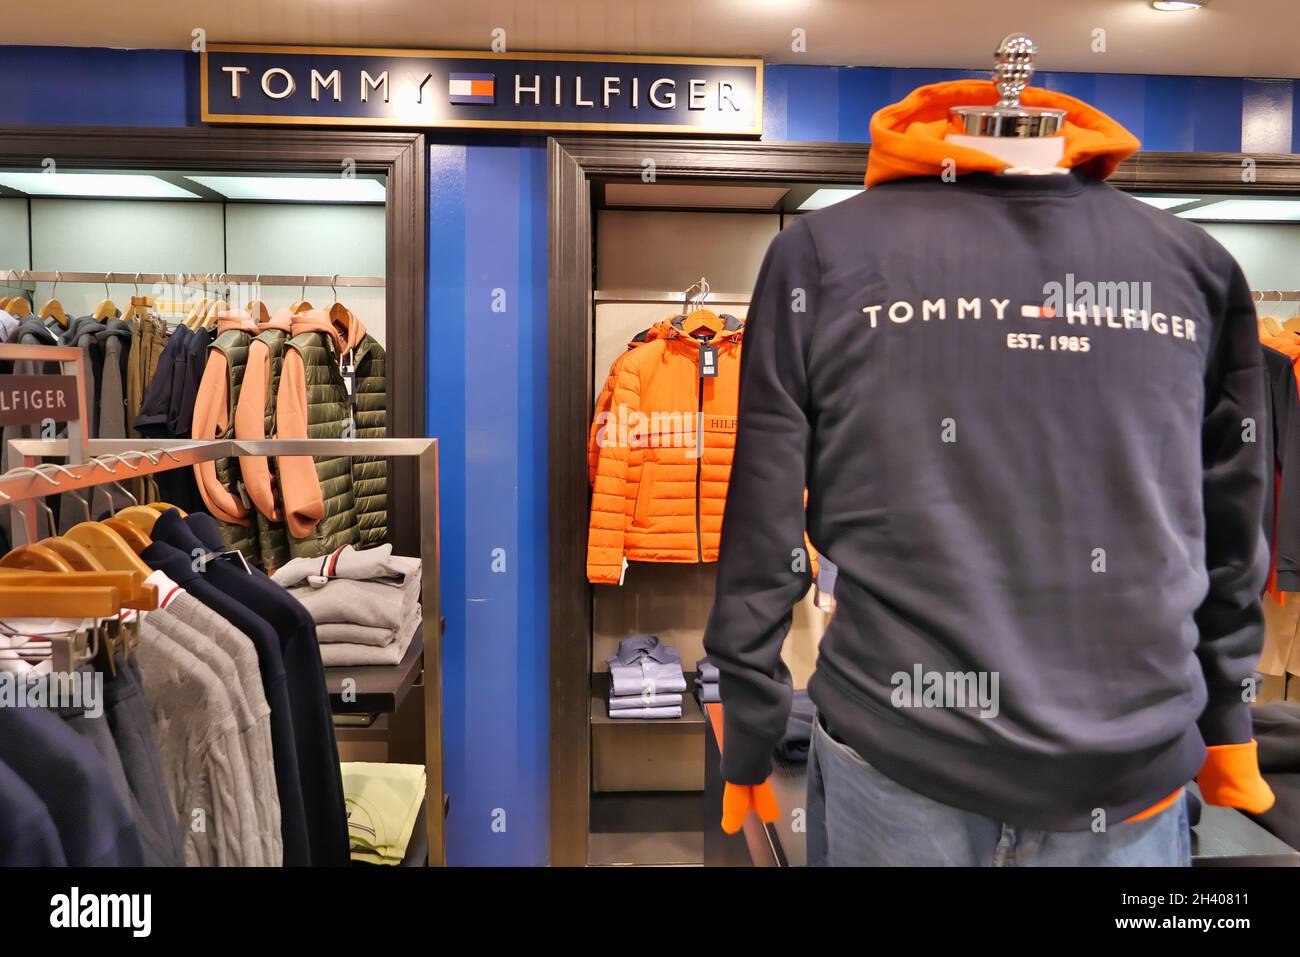 Tommy Hilfiger Outlet In-store graphics on Behance